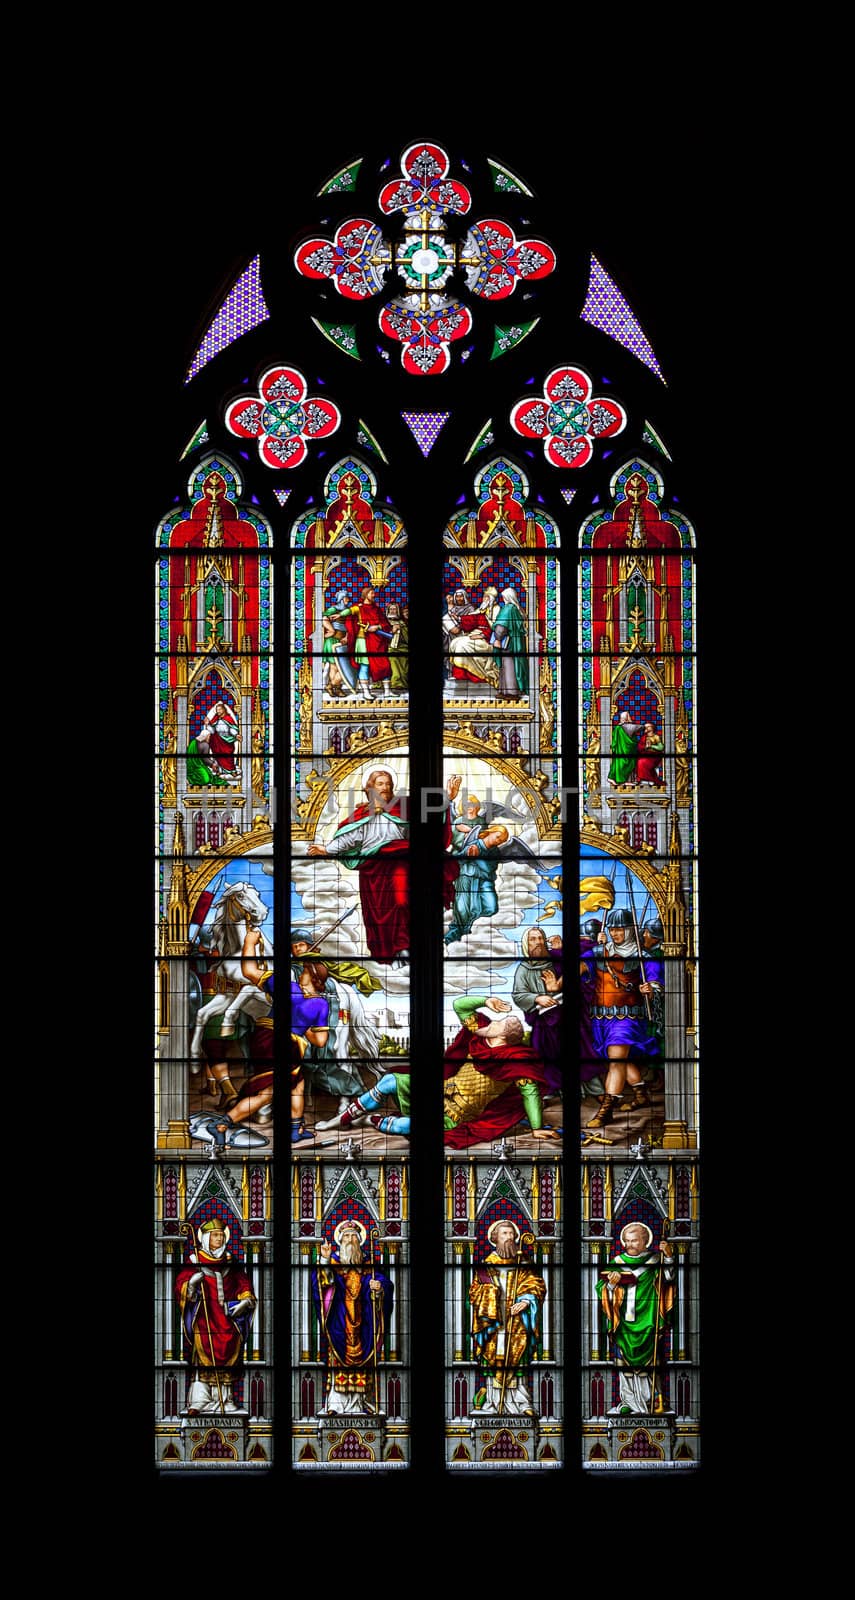 An image of a colorful church window in Cologne